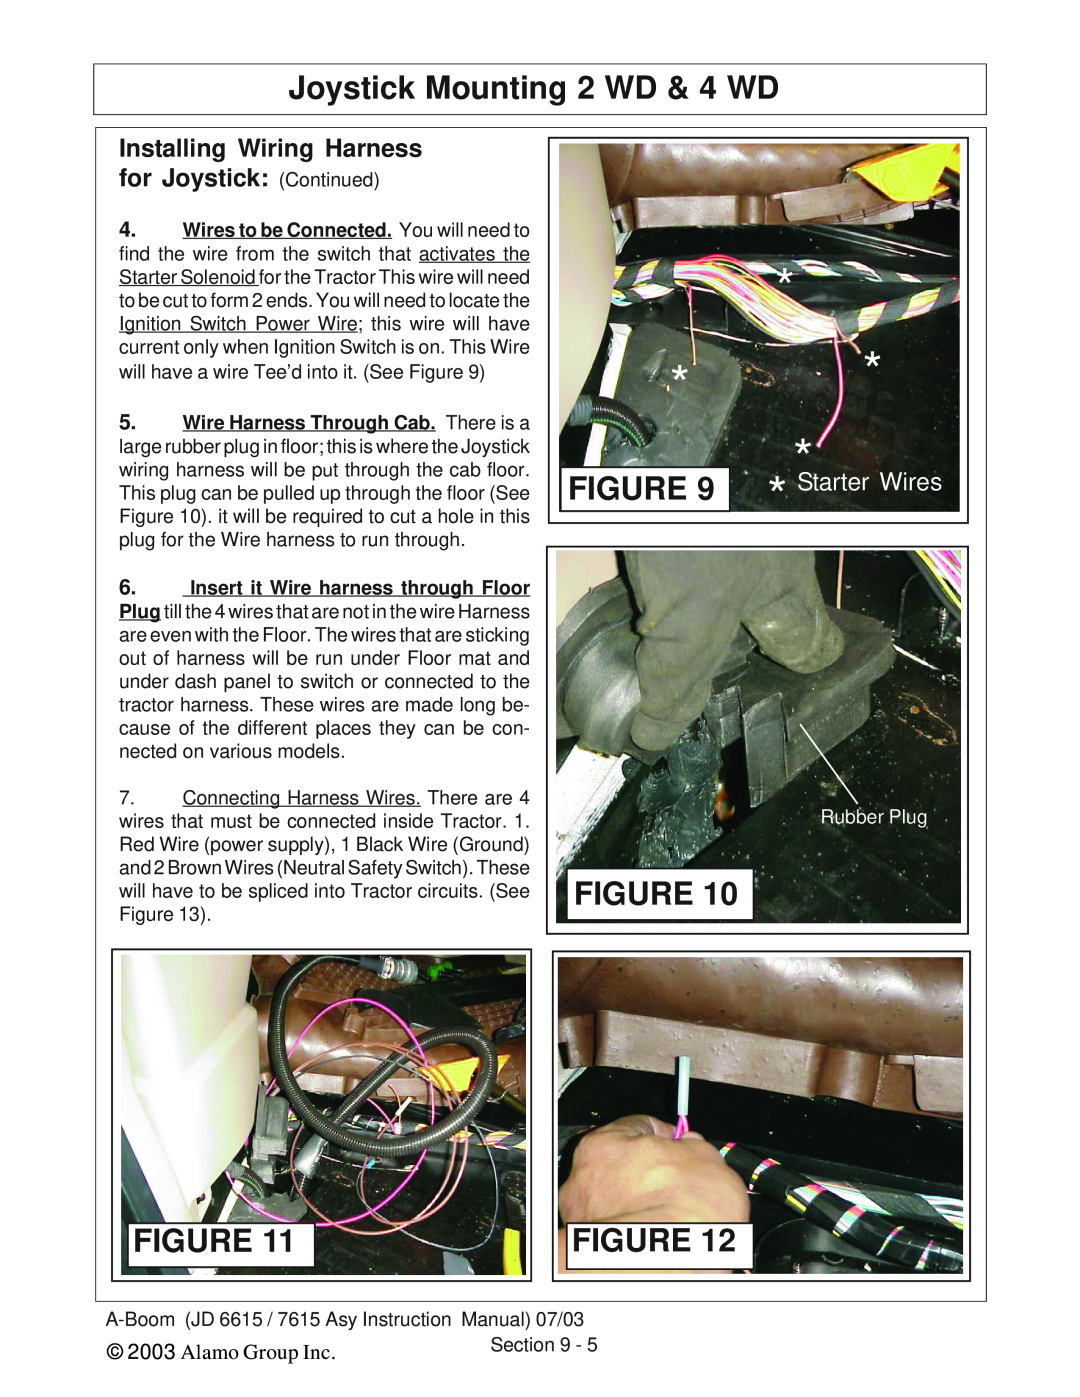 Alamo DSEB-D16/SAS Installing Wiring Harness for Joystick Continued, Joystick Mounting 2 WD & 4 WD, Starter Wires 